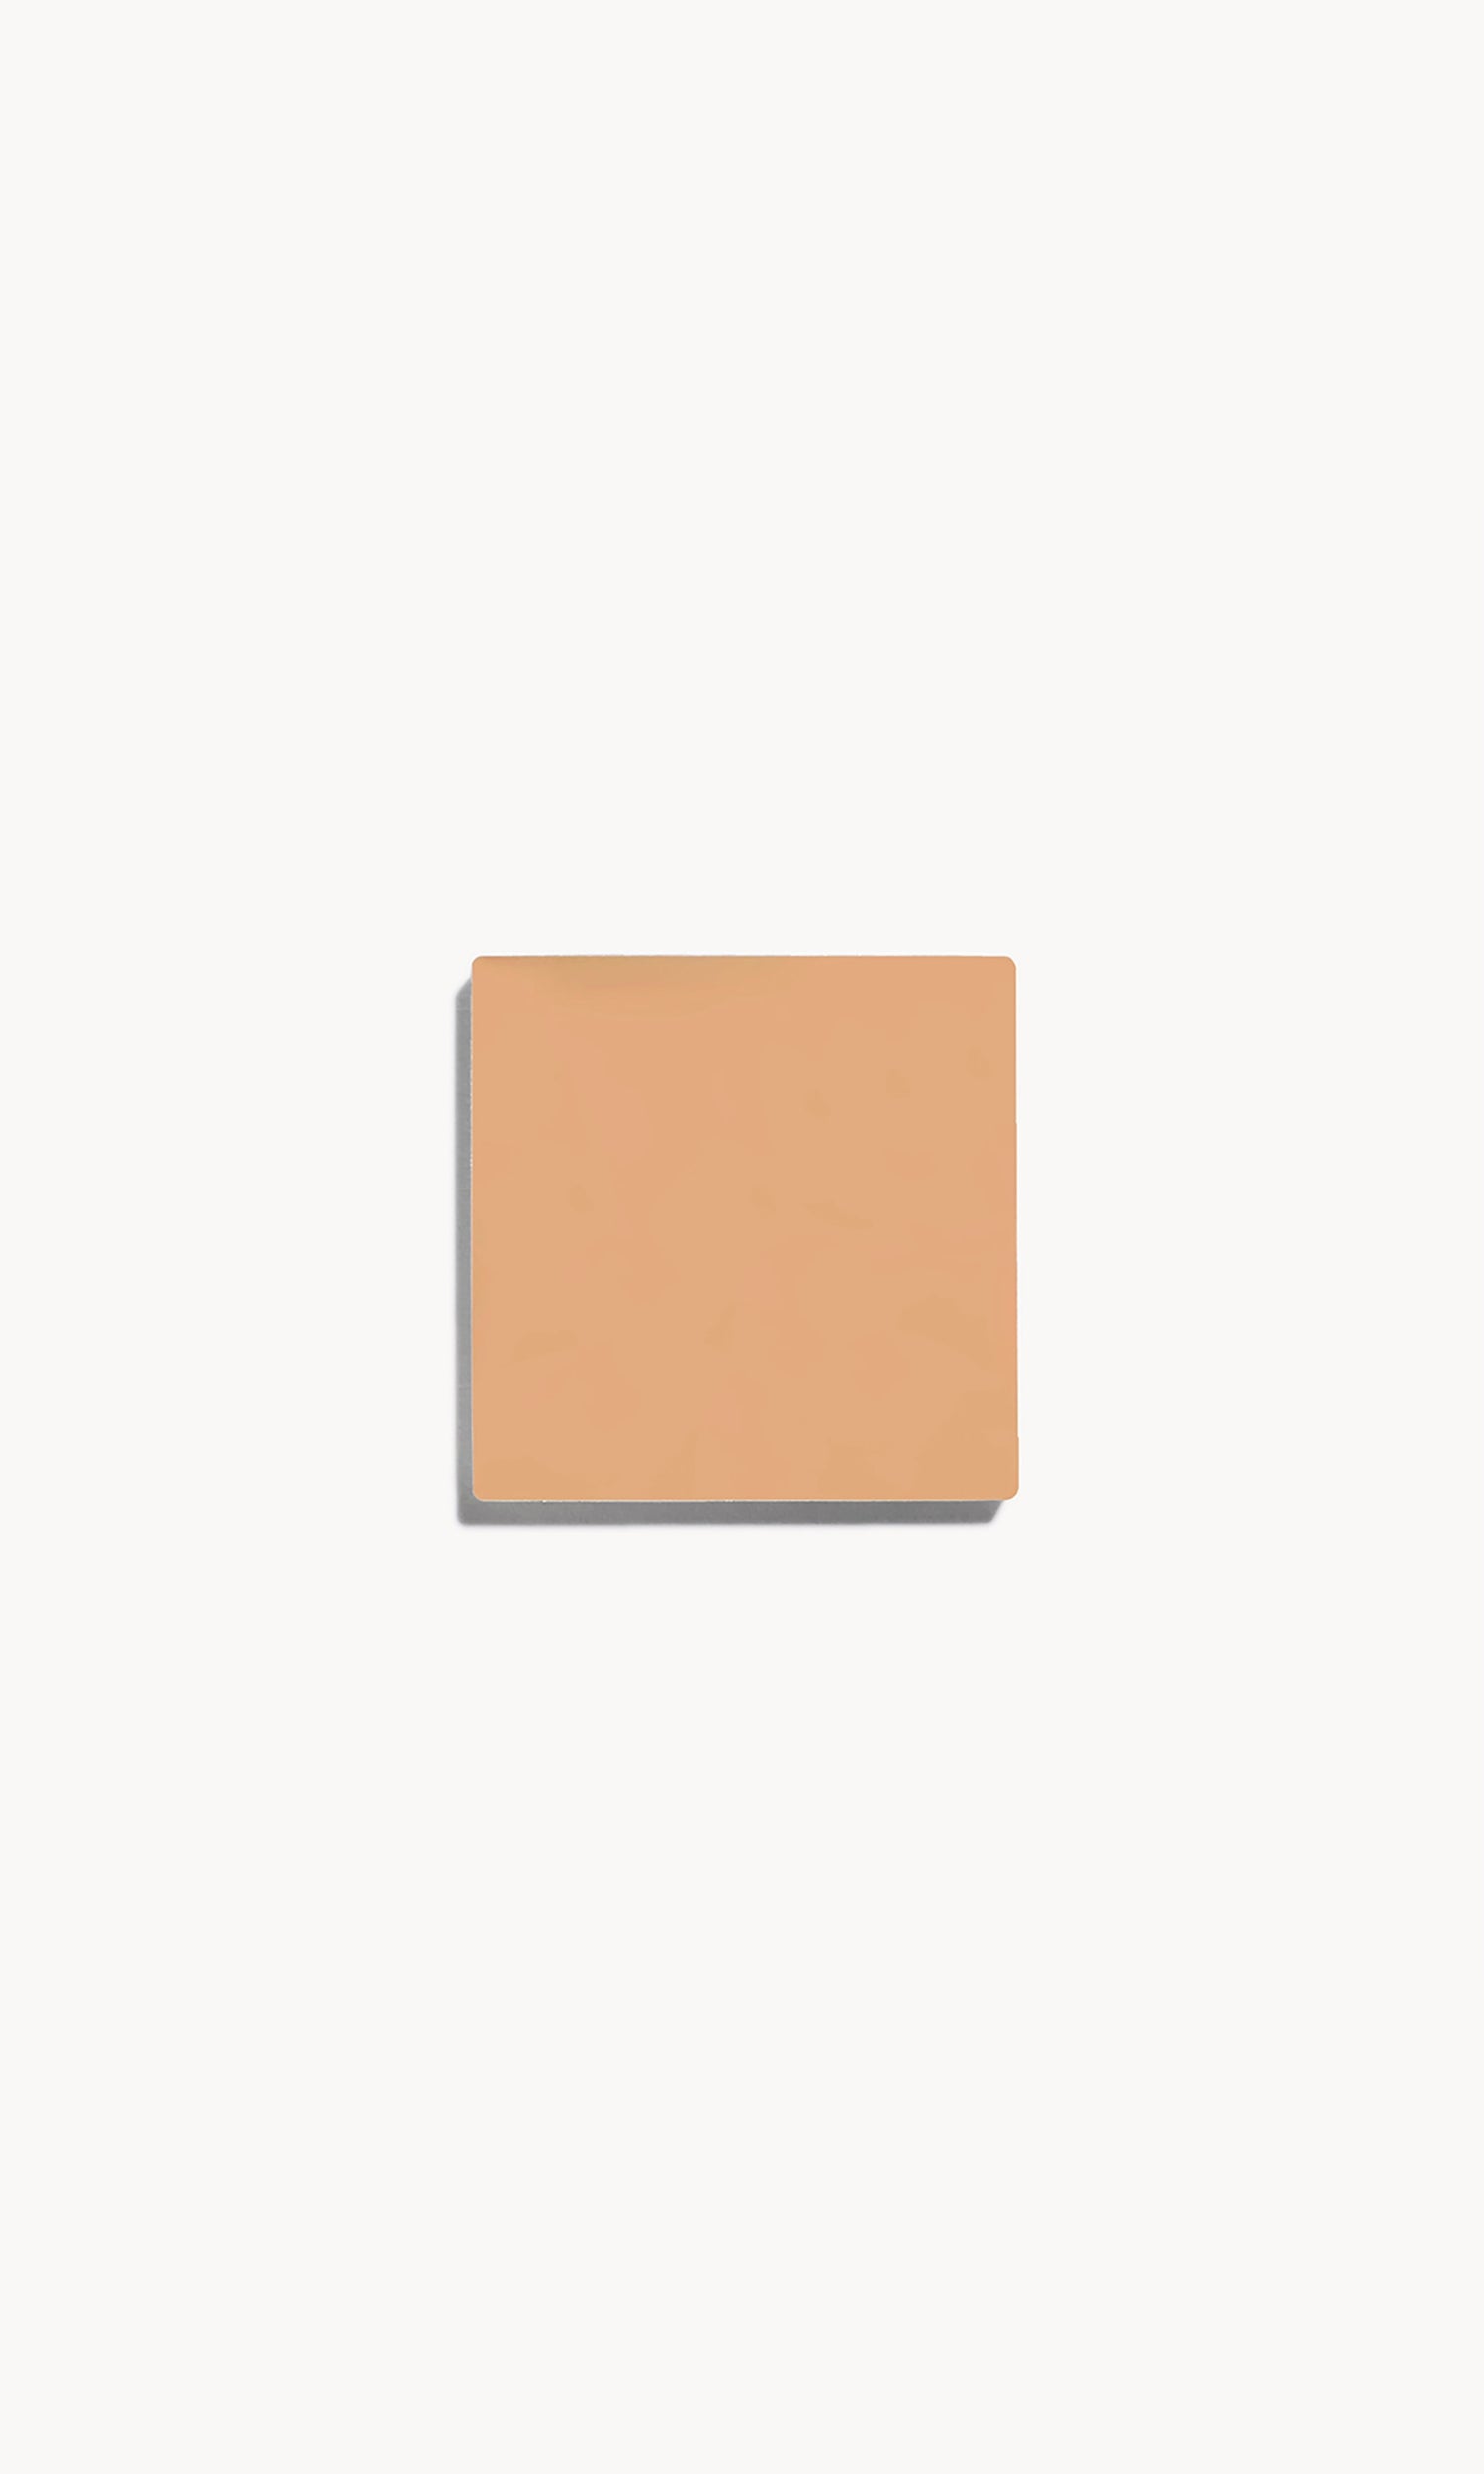 square of medium neutral-toned cream foundation on a white background